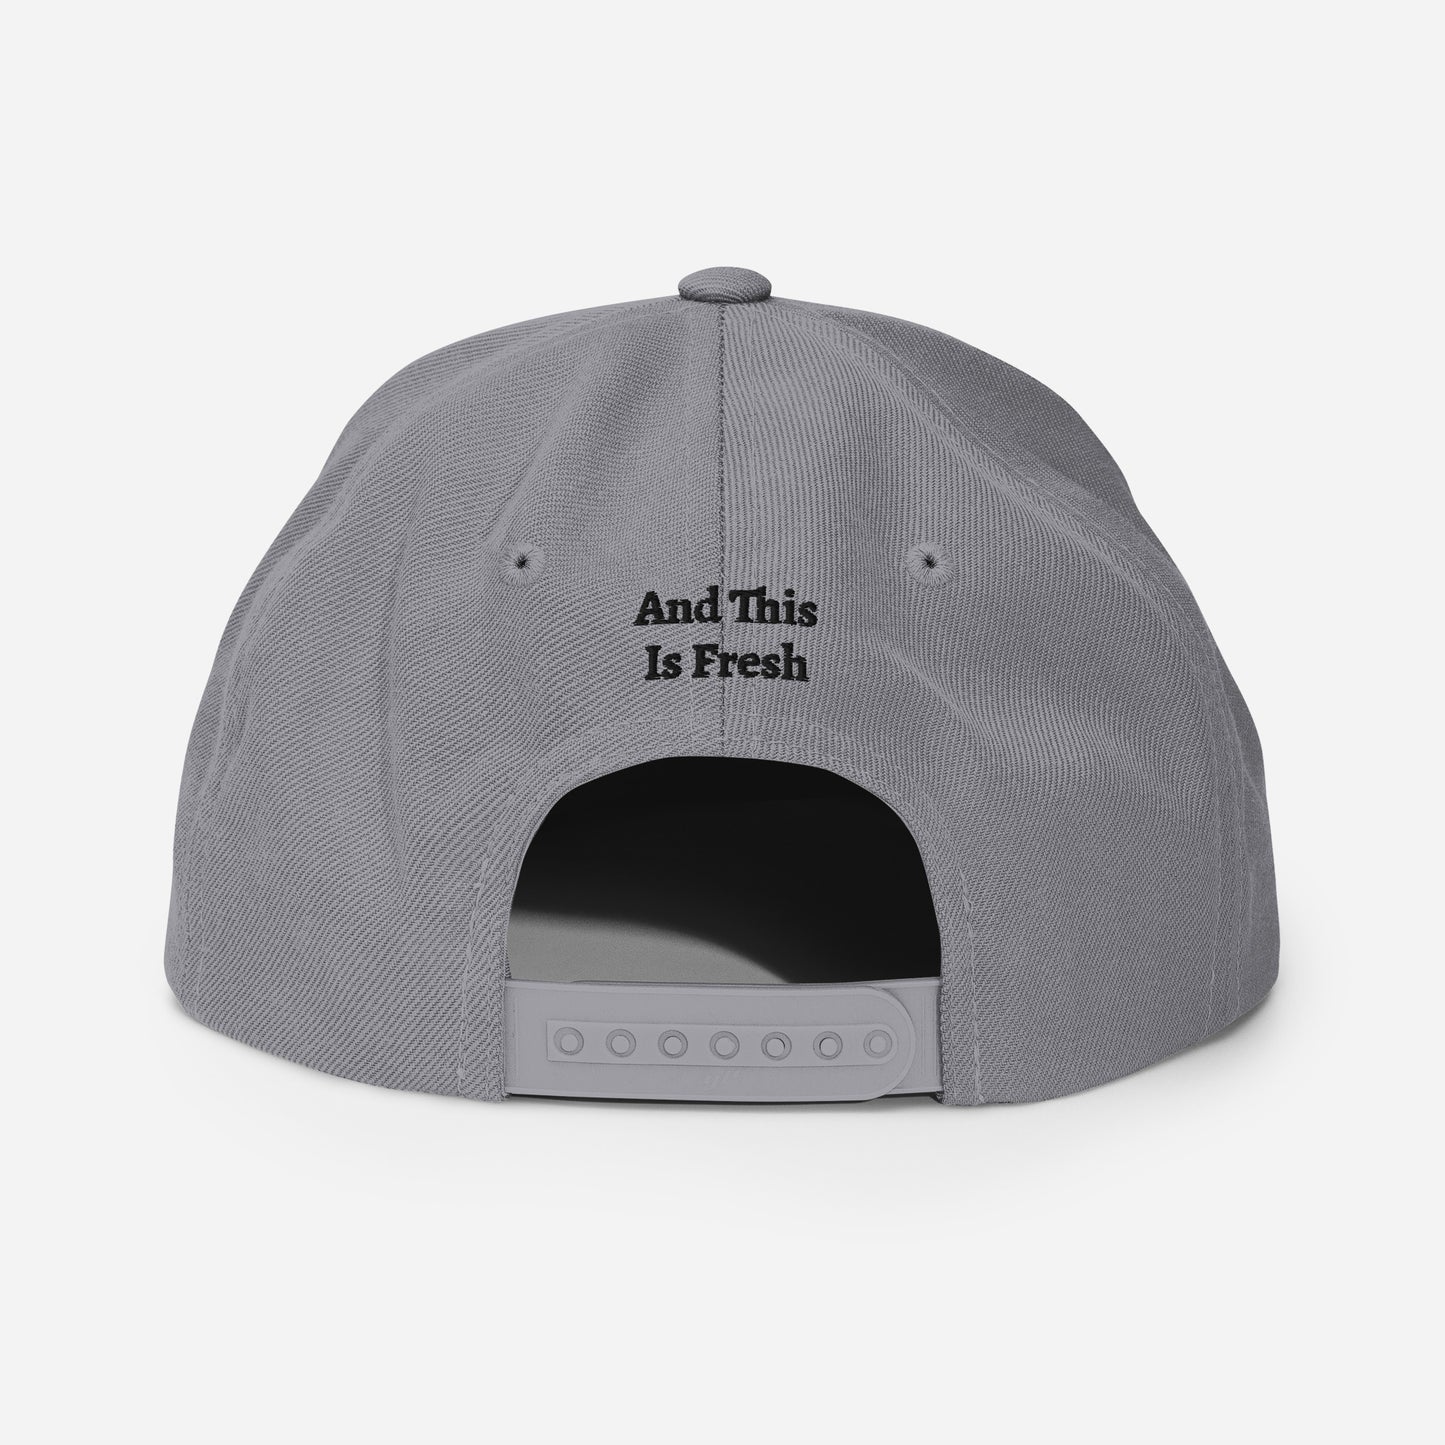 Chuck "The Voice" Roberts Silver Gray Embroidered Snapback Hat